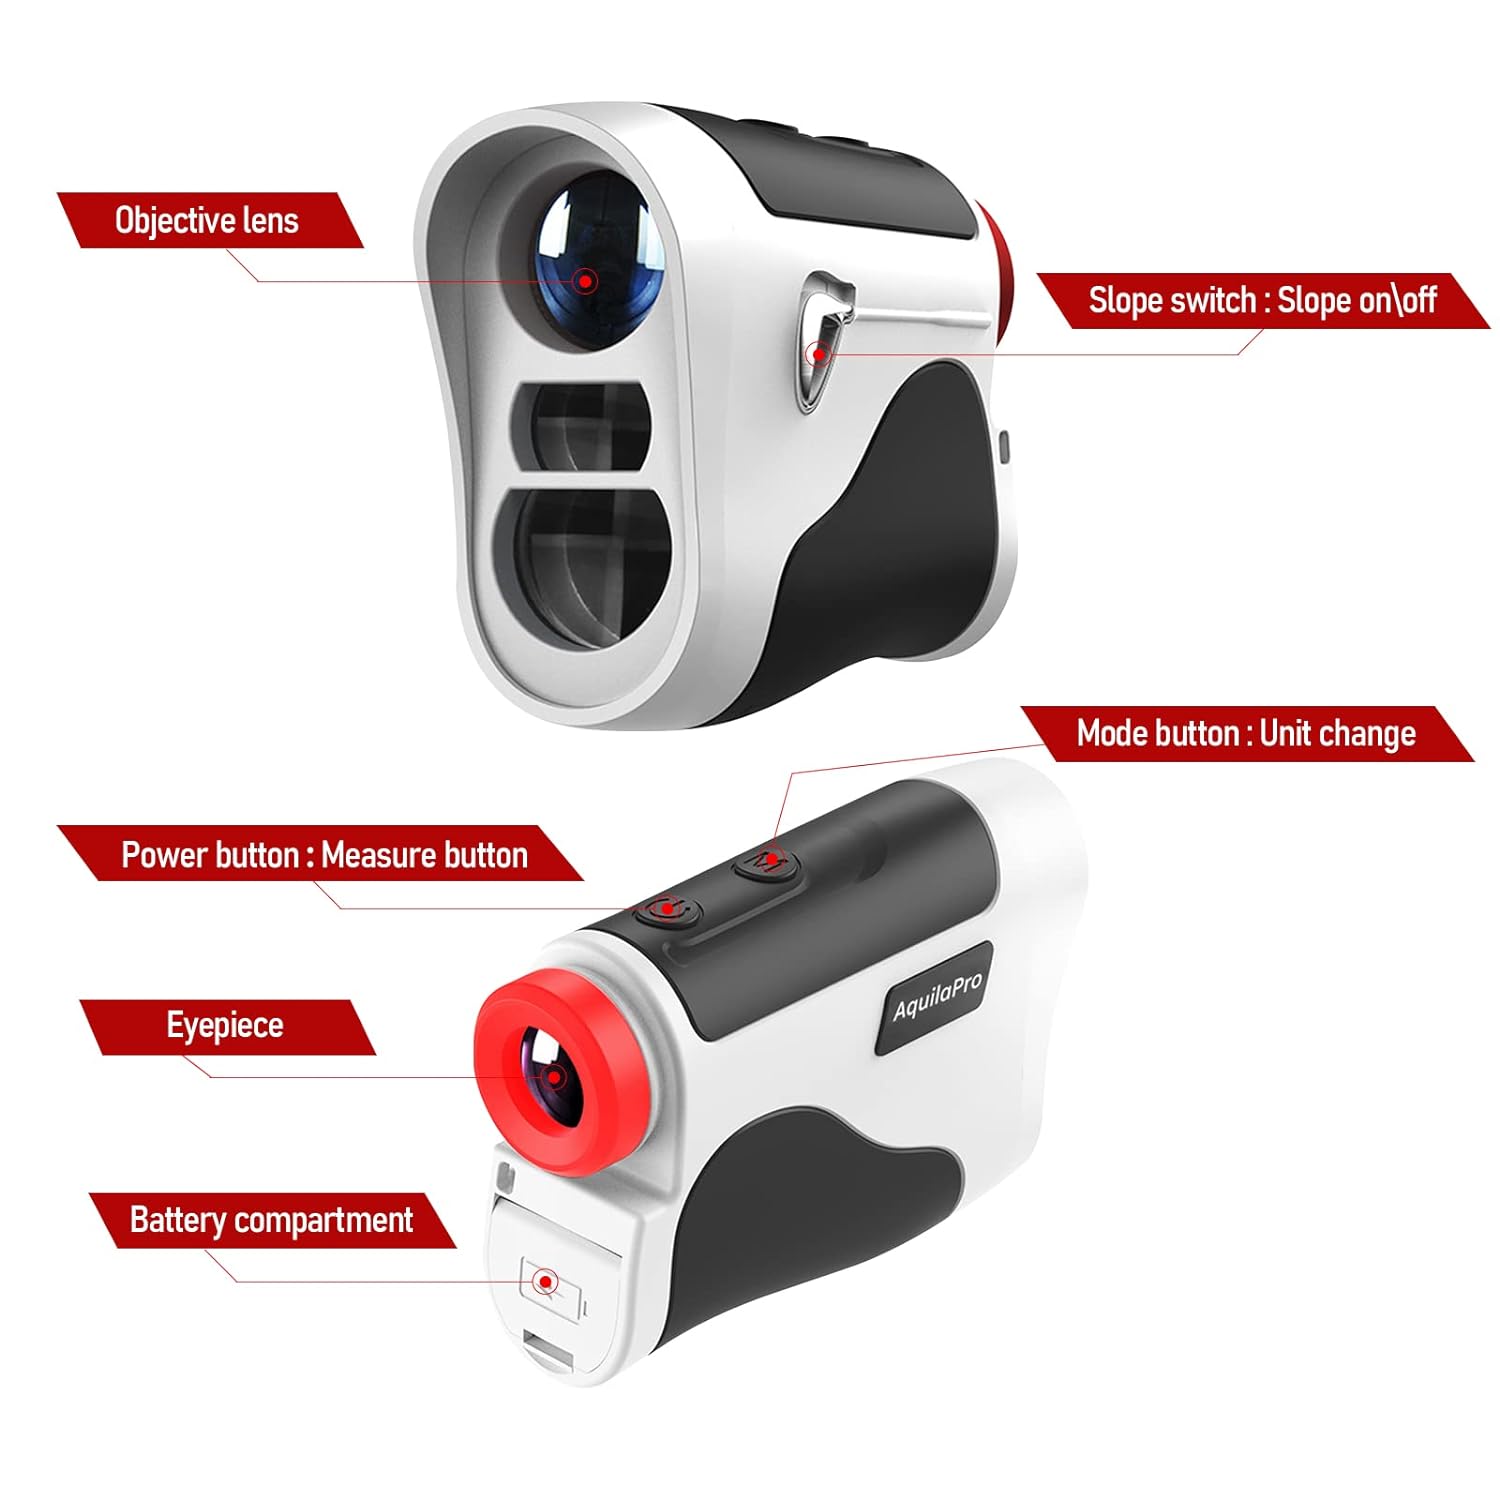 AquilaPro G4Pro Golf Rangefinder with Slope | Flagpole Lock with Pulse Vibration | Slope Switch for Golf Tournament Legal | 600Yards Max Range | 6X Magnification